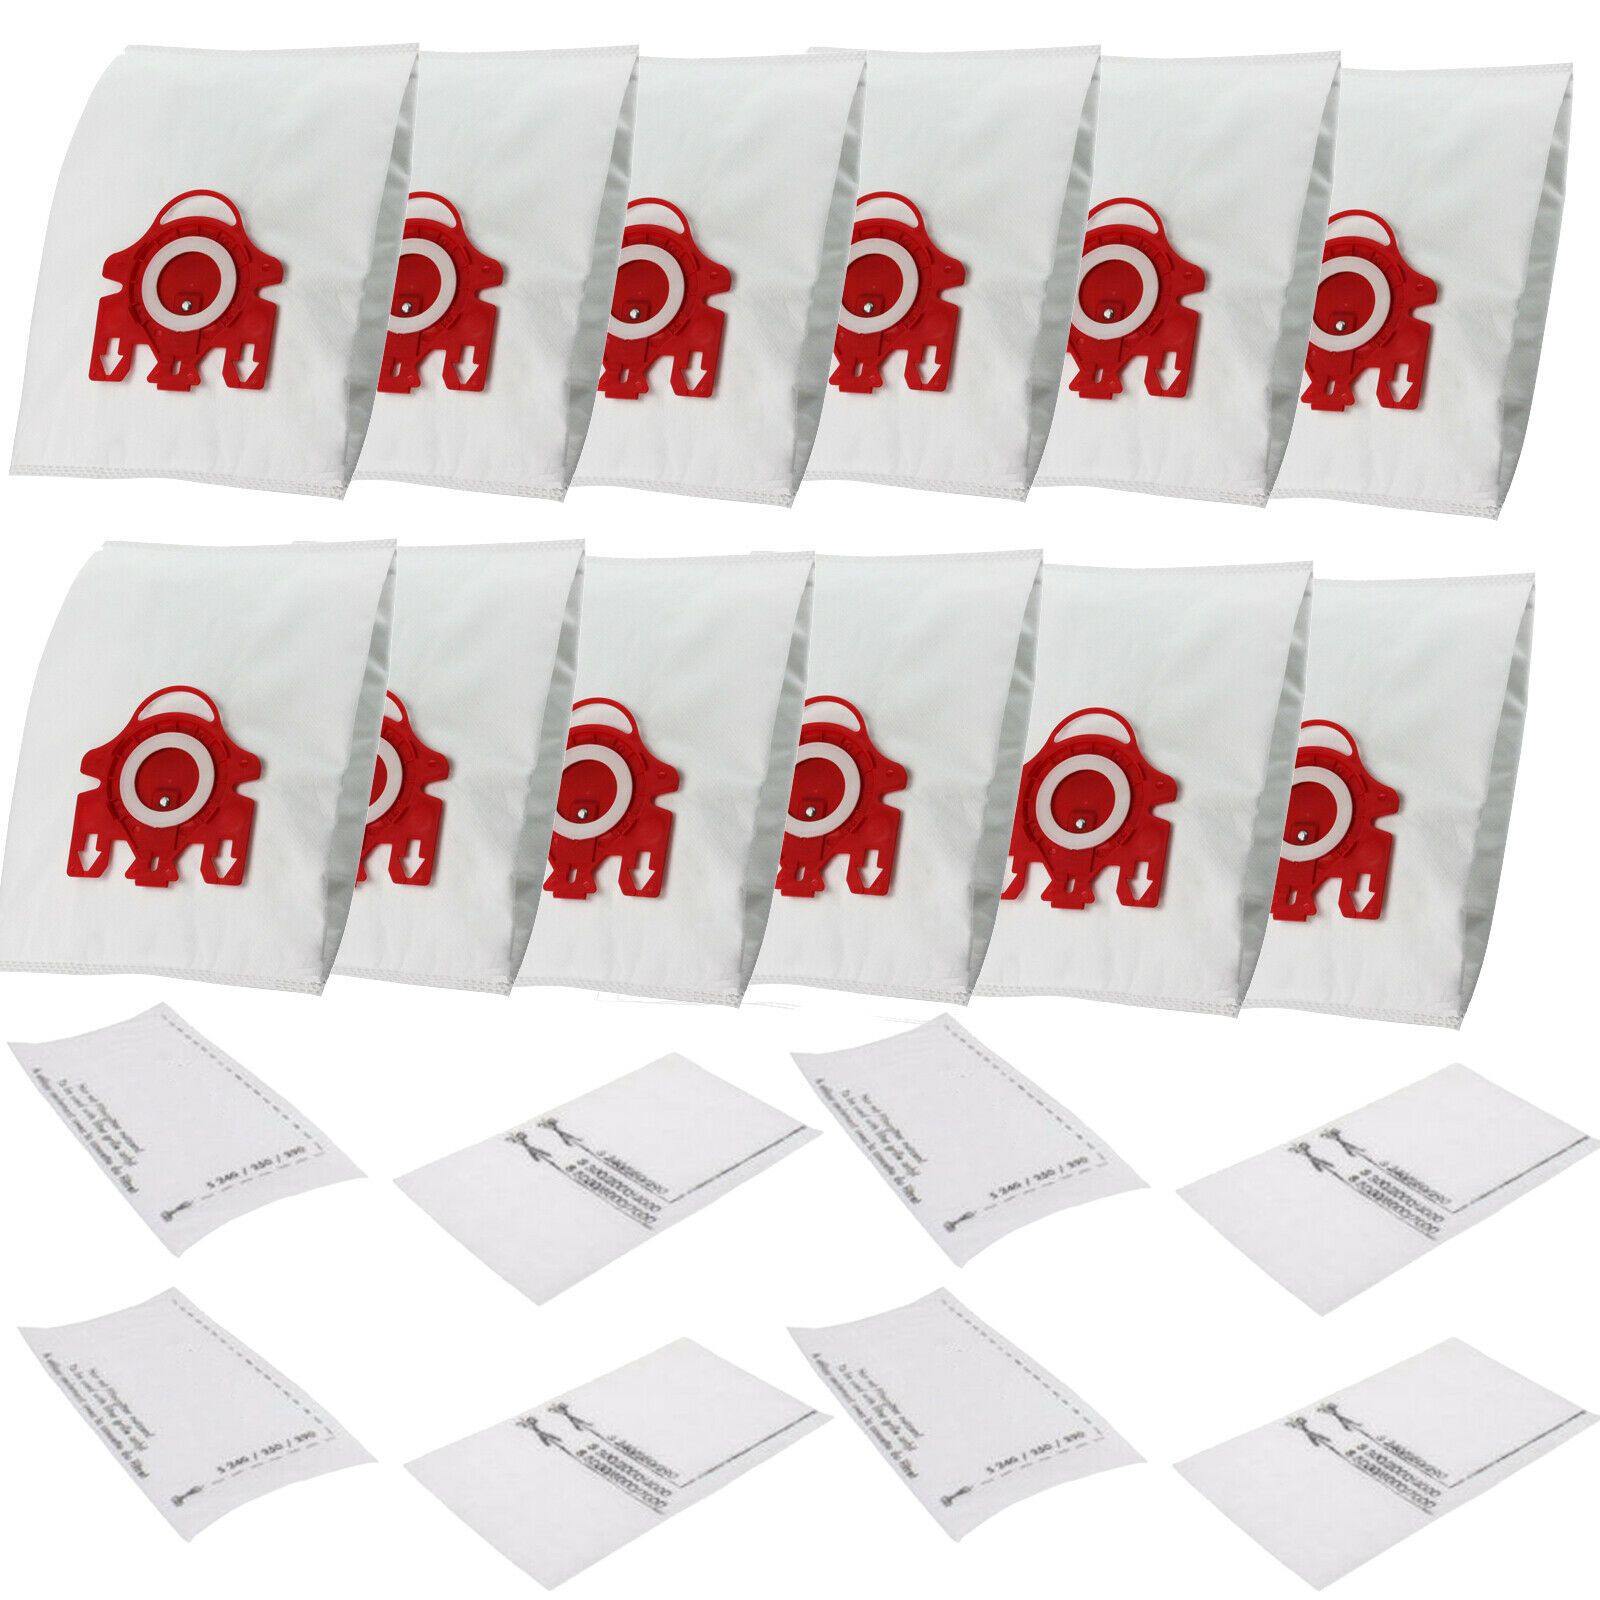 12 Dust Bags & 8 Filters For Miele FJM Vacuum S511 S512 S512I S513 S514-1 S515-1 Sparesbarn